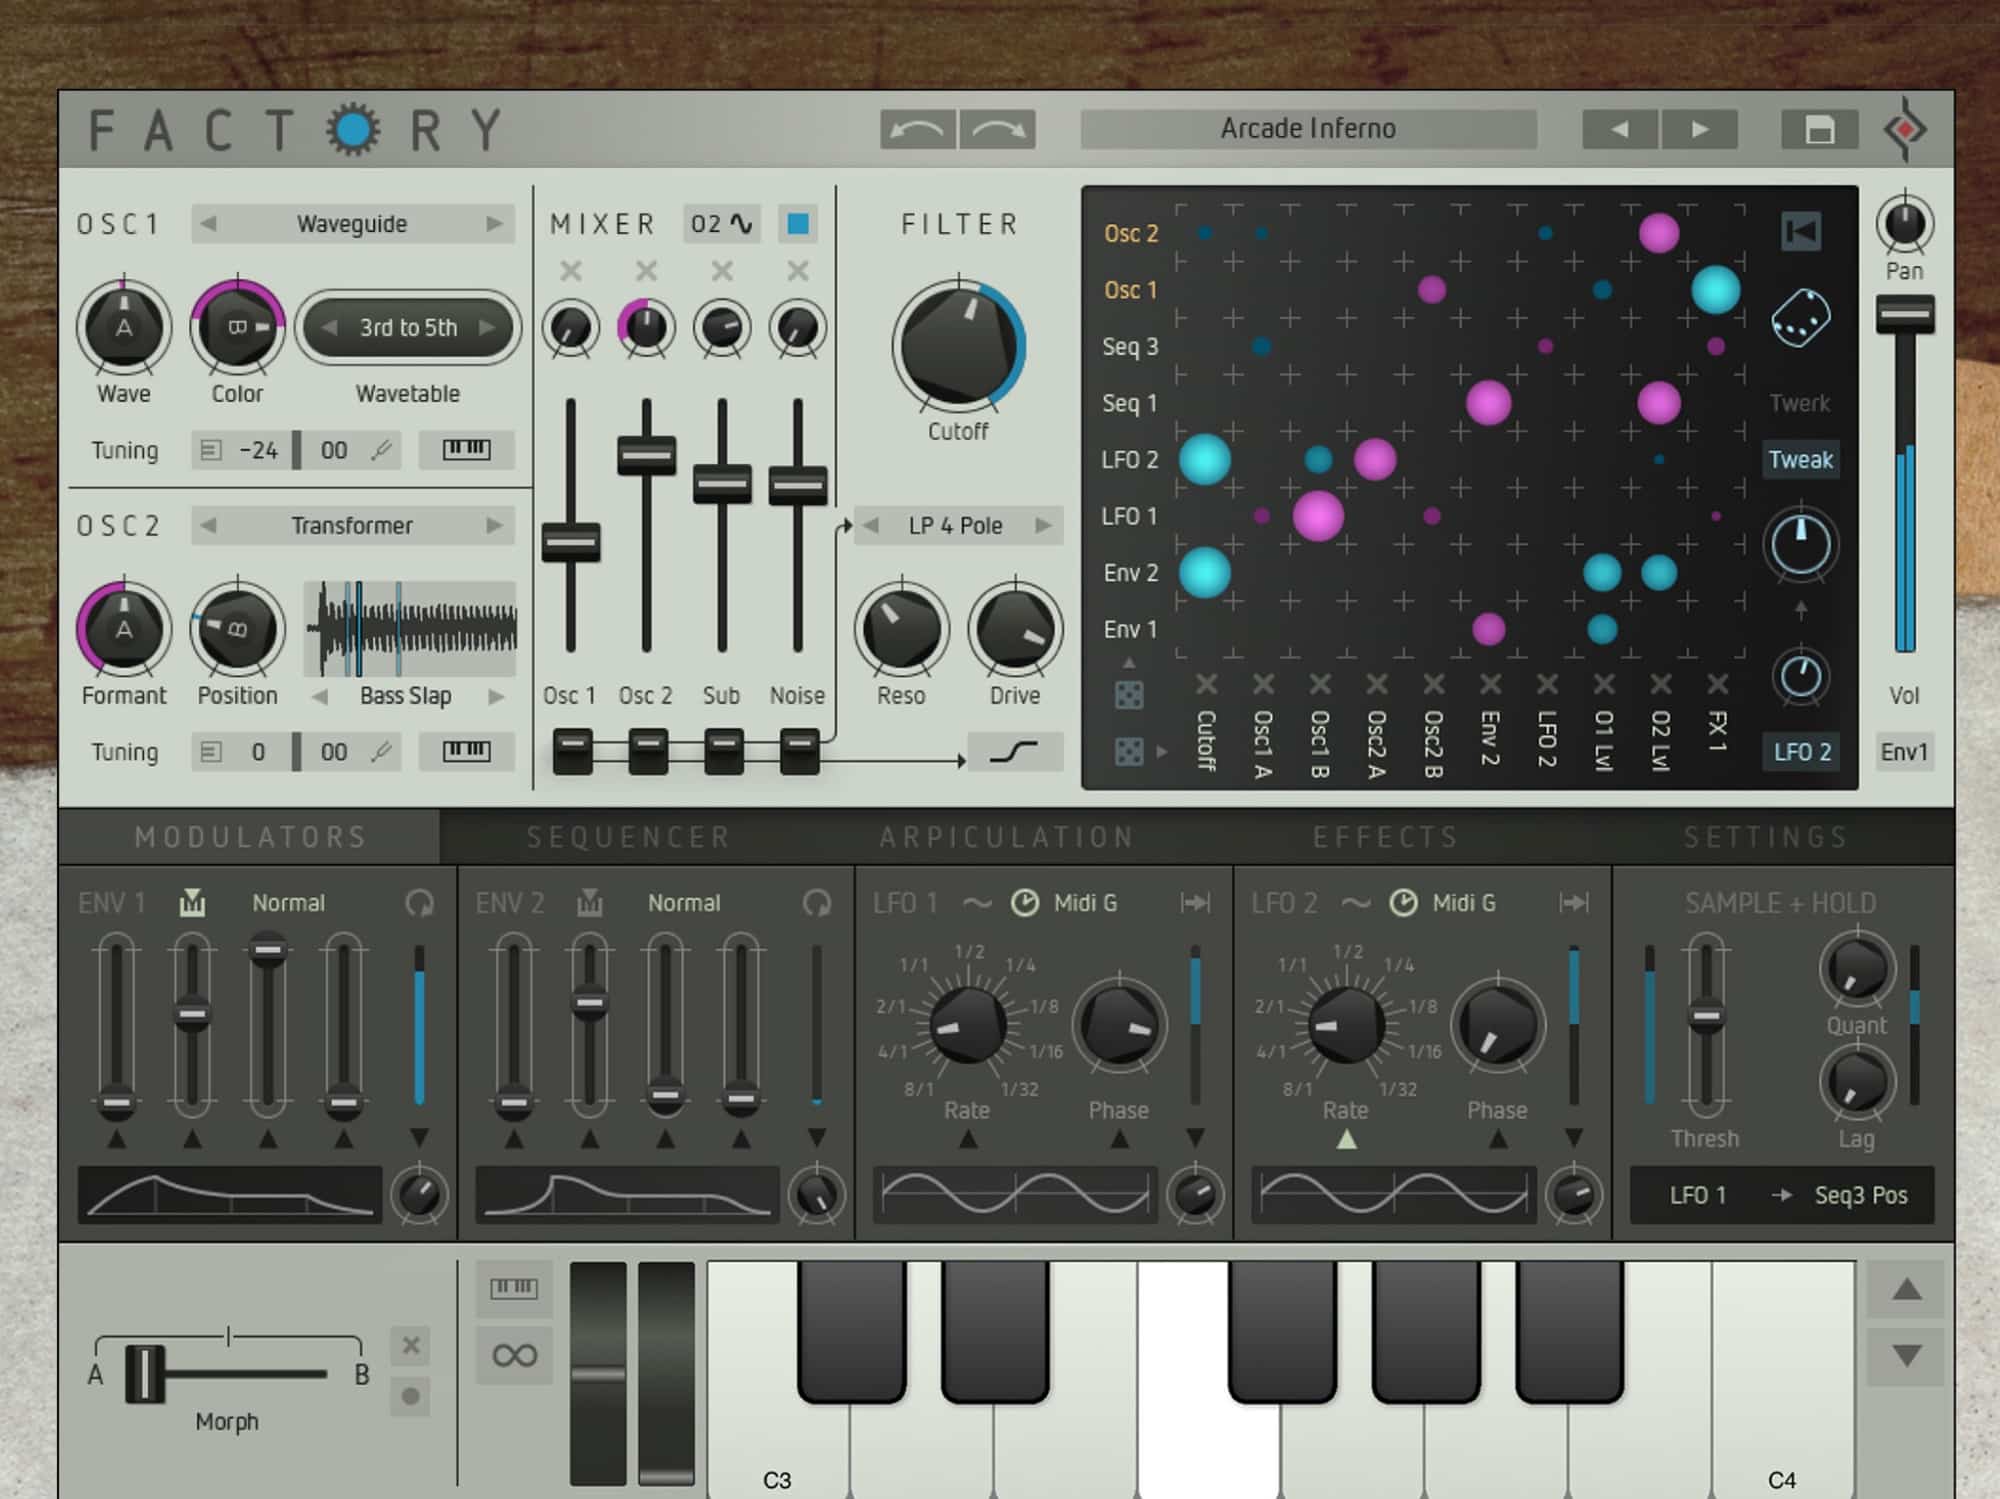 You can flip through presets, or design sounds from scratch.